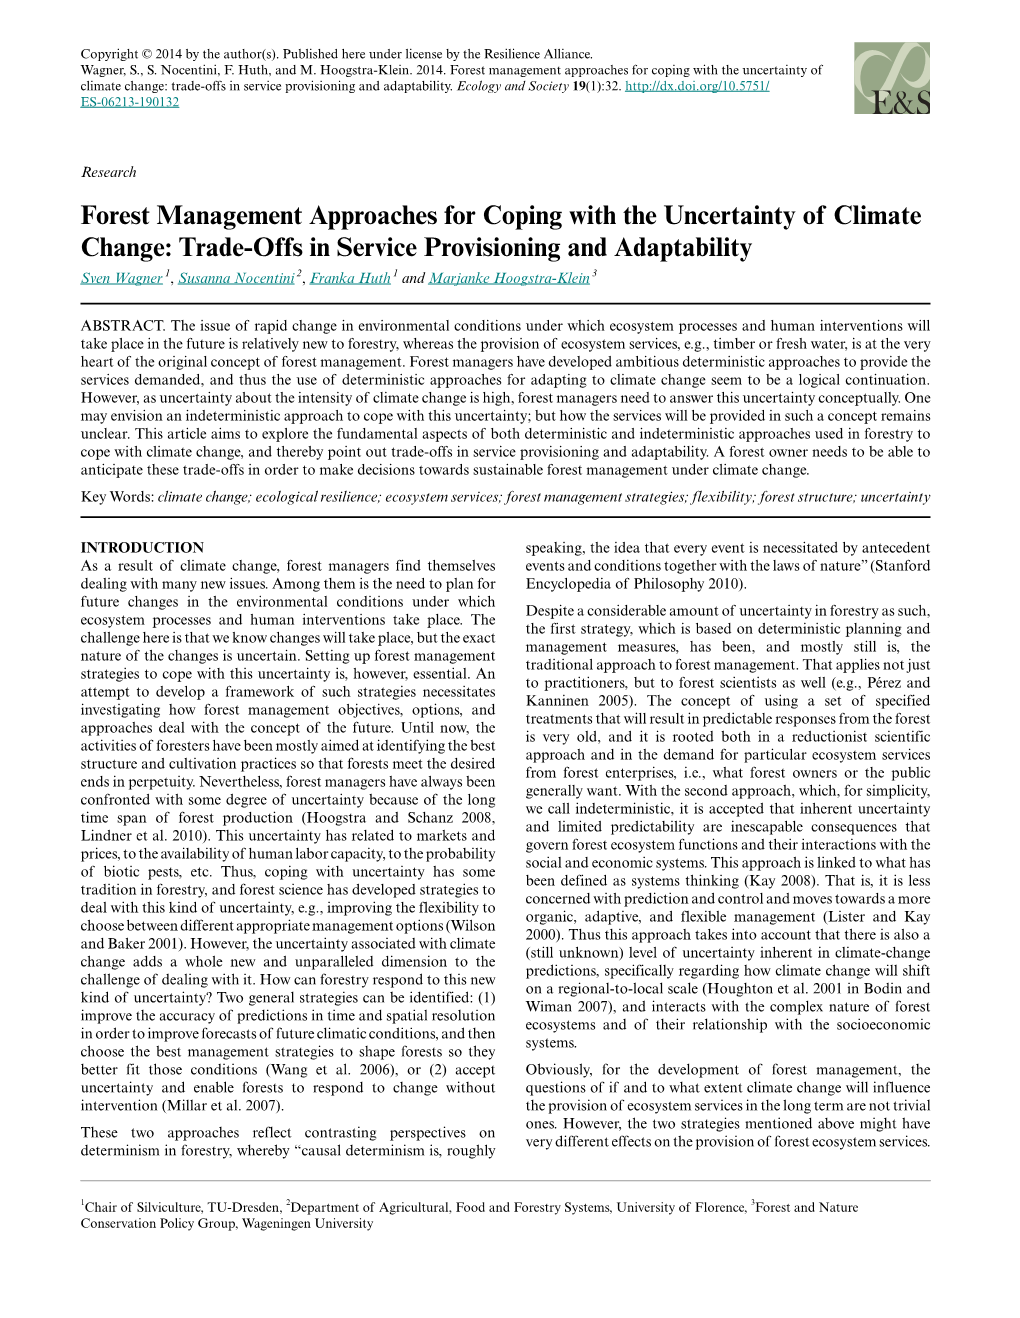 Forest Management Approaches for Coping with the Uncertainty of Climate Change: Trade-Offs in Service Provisioning and Adaptability